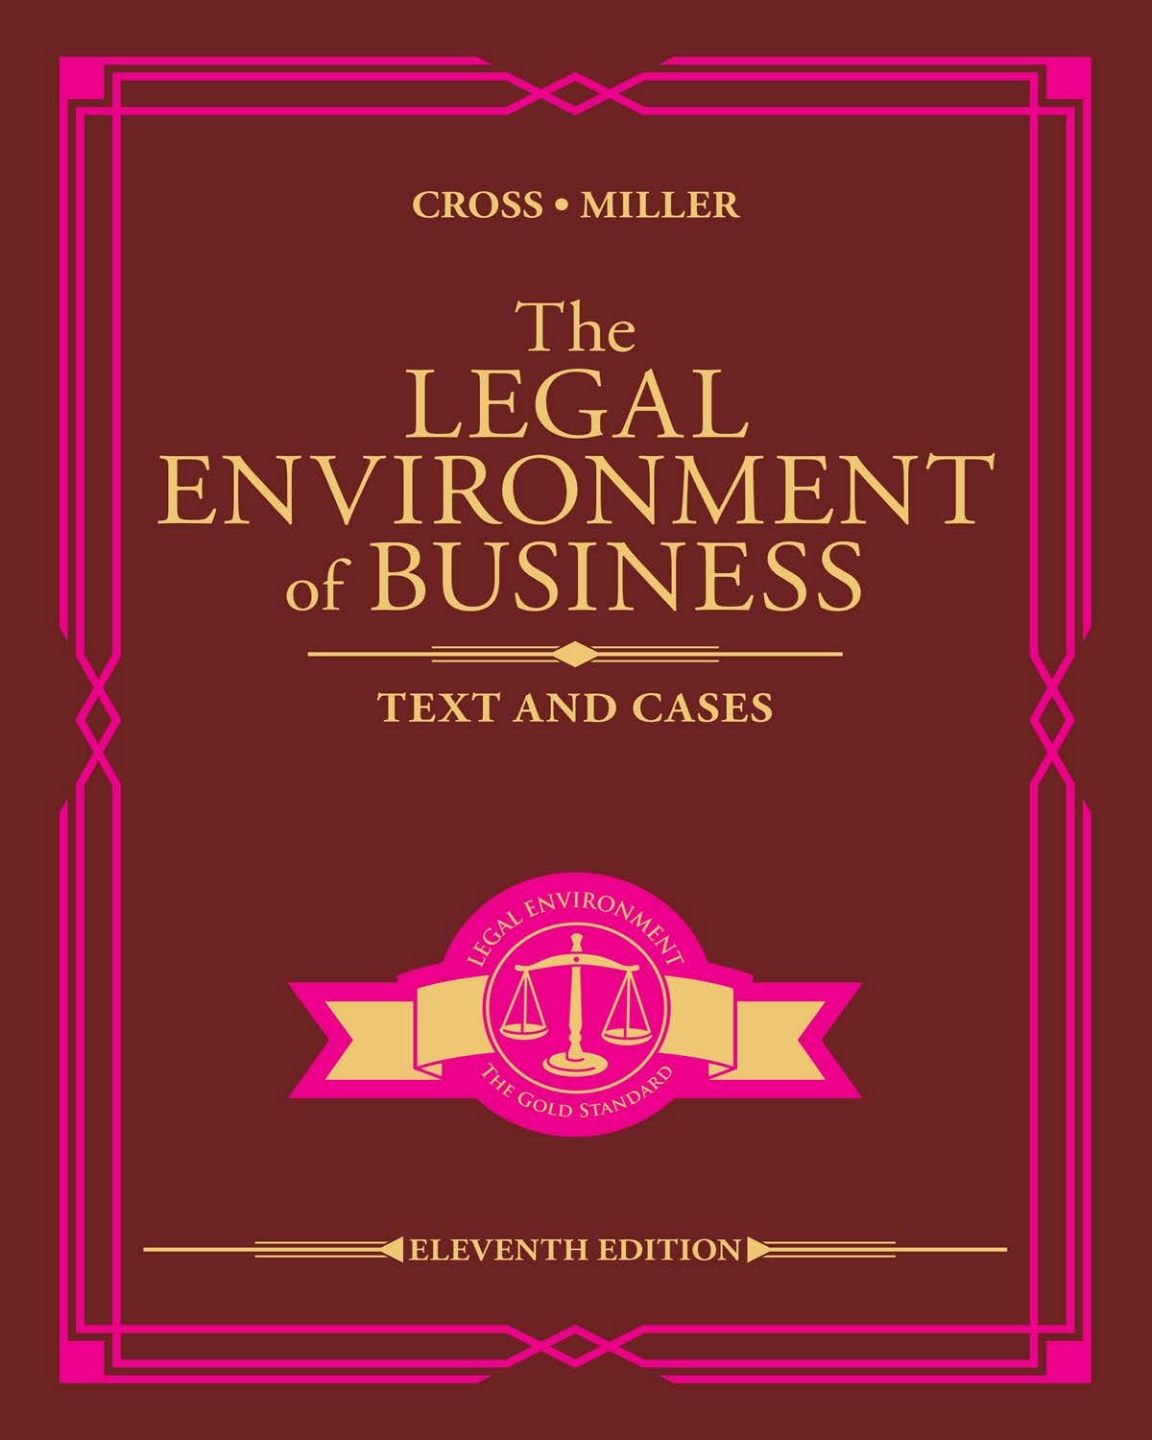 The Legal Environment of Business: Text and Cases (11th Edition) – eBook PDF